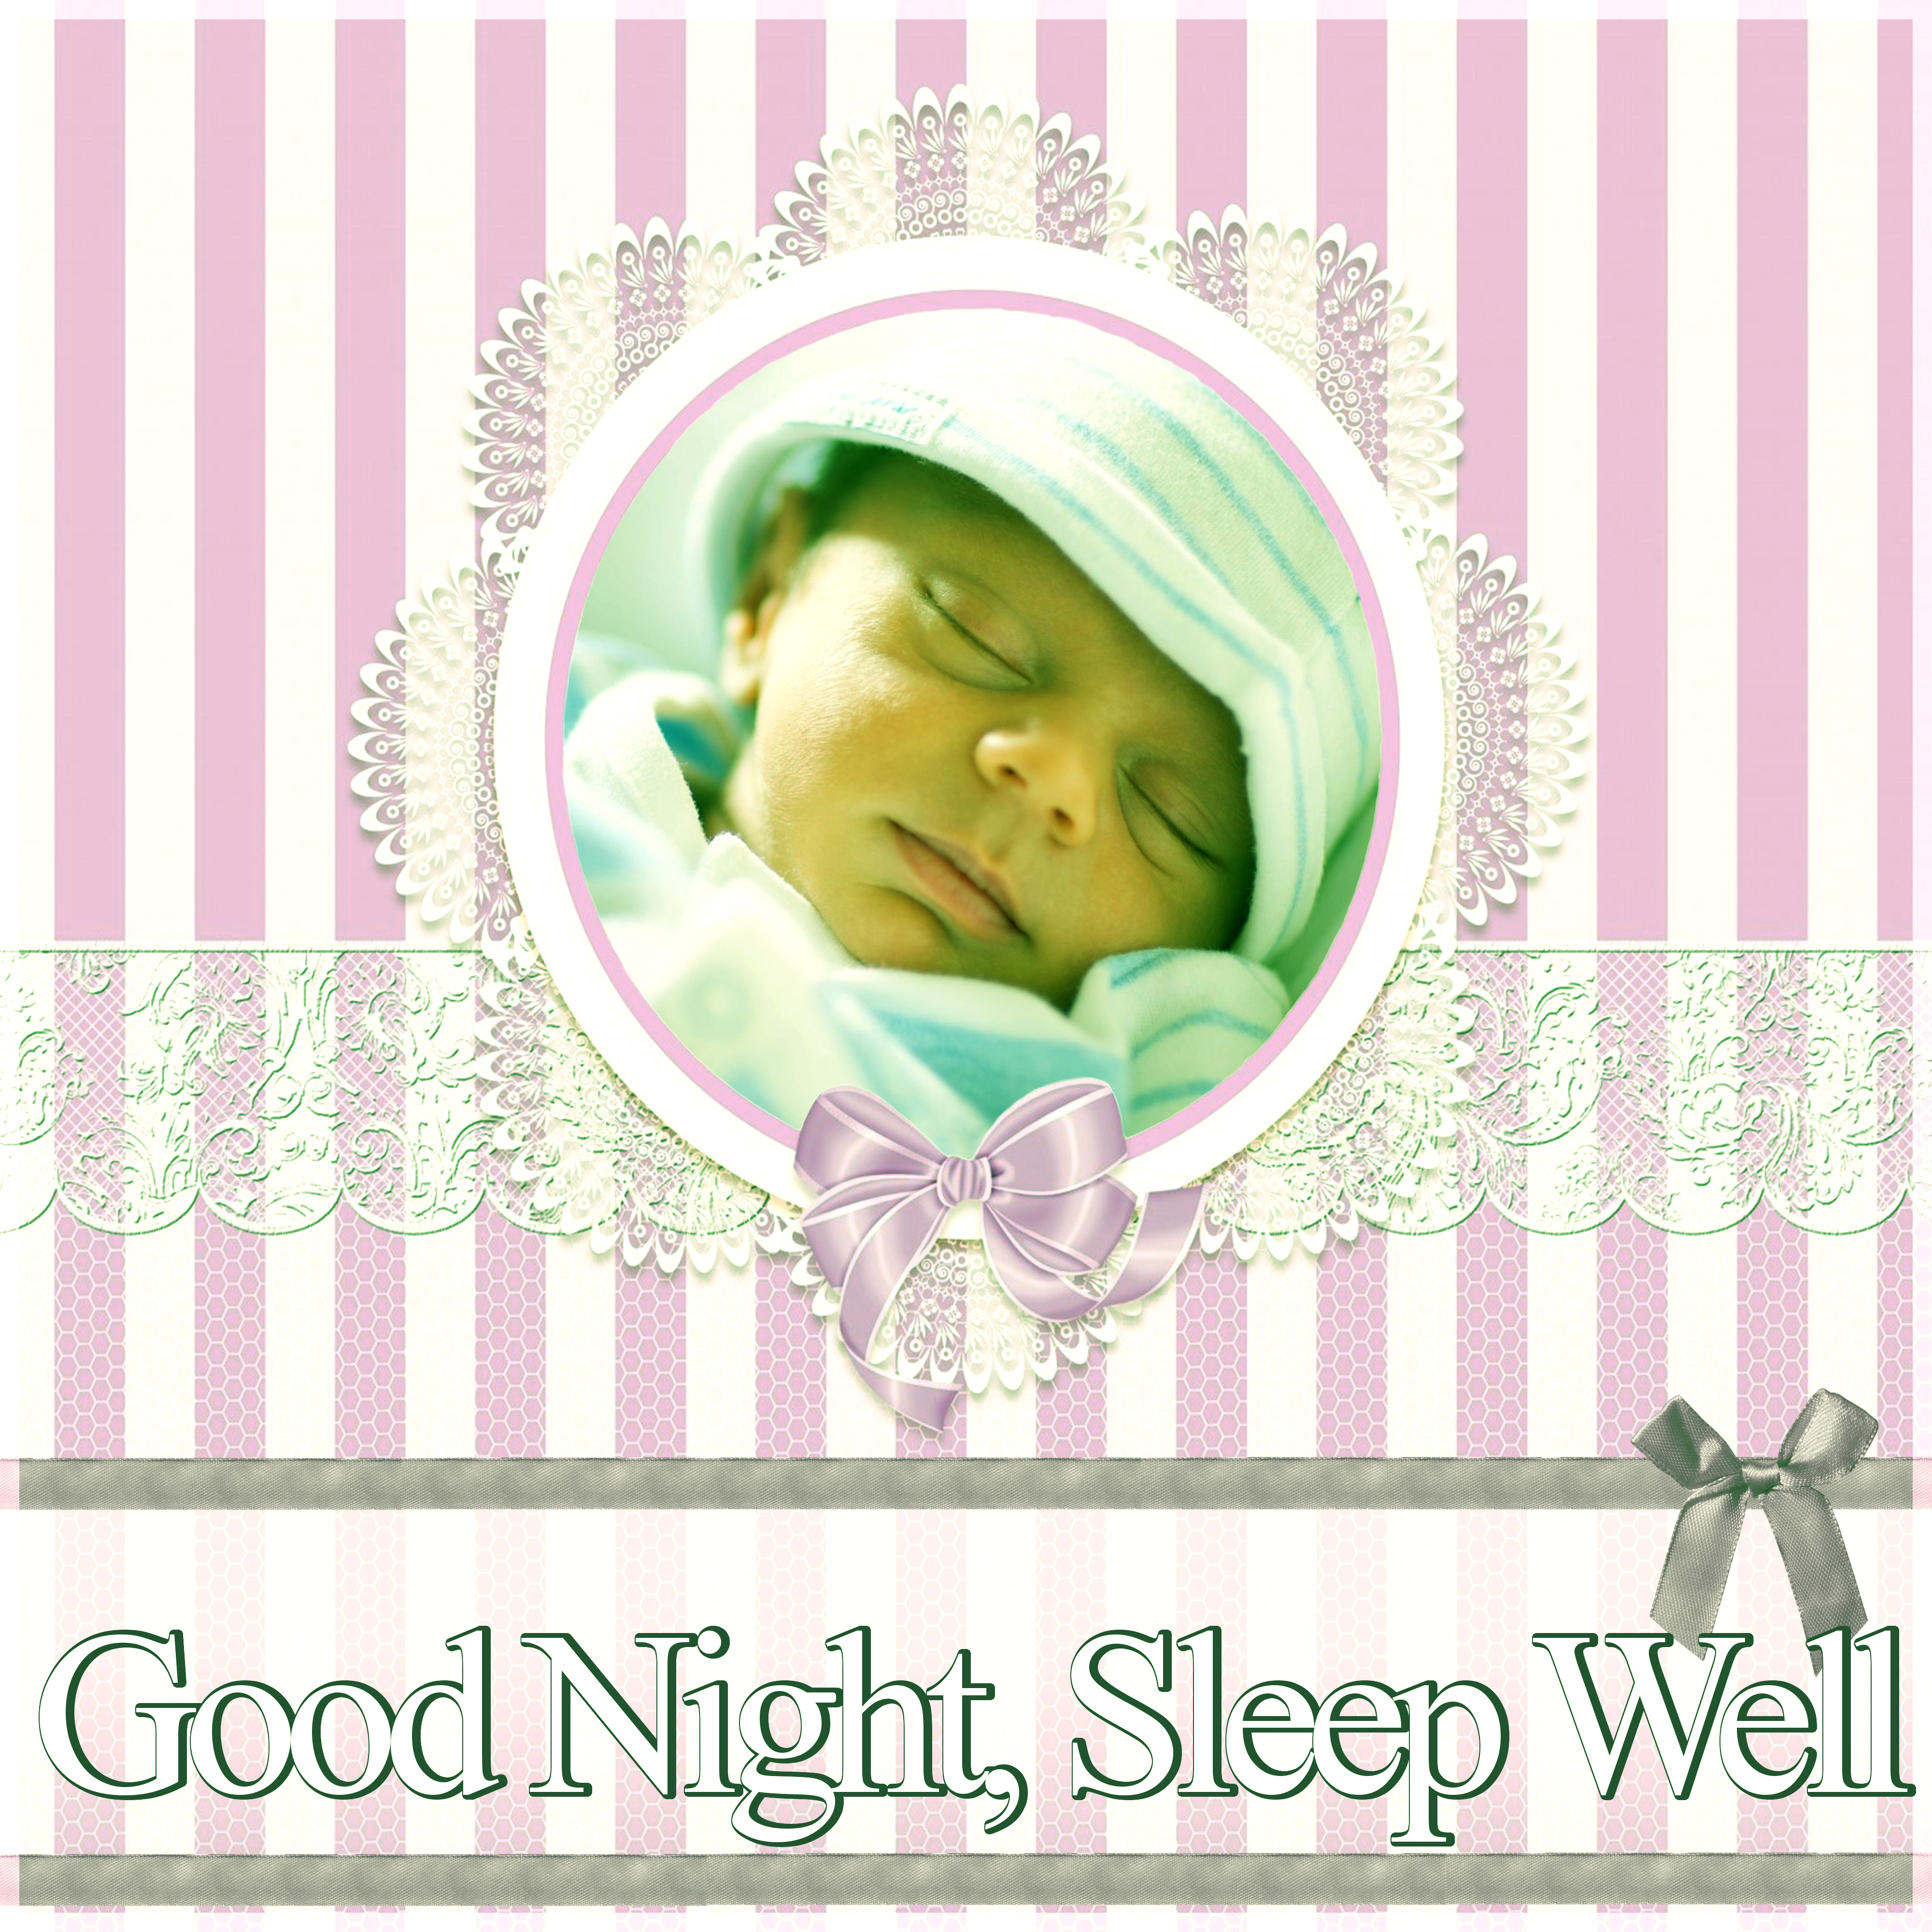 Good Night, Sleep Well - Sleeping Music for Babies and Infants, New Age Soothing Sounds for Newborns to Relax, White Noises and Nature Sounds for Deep Sleep